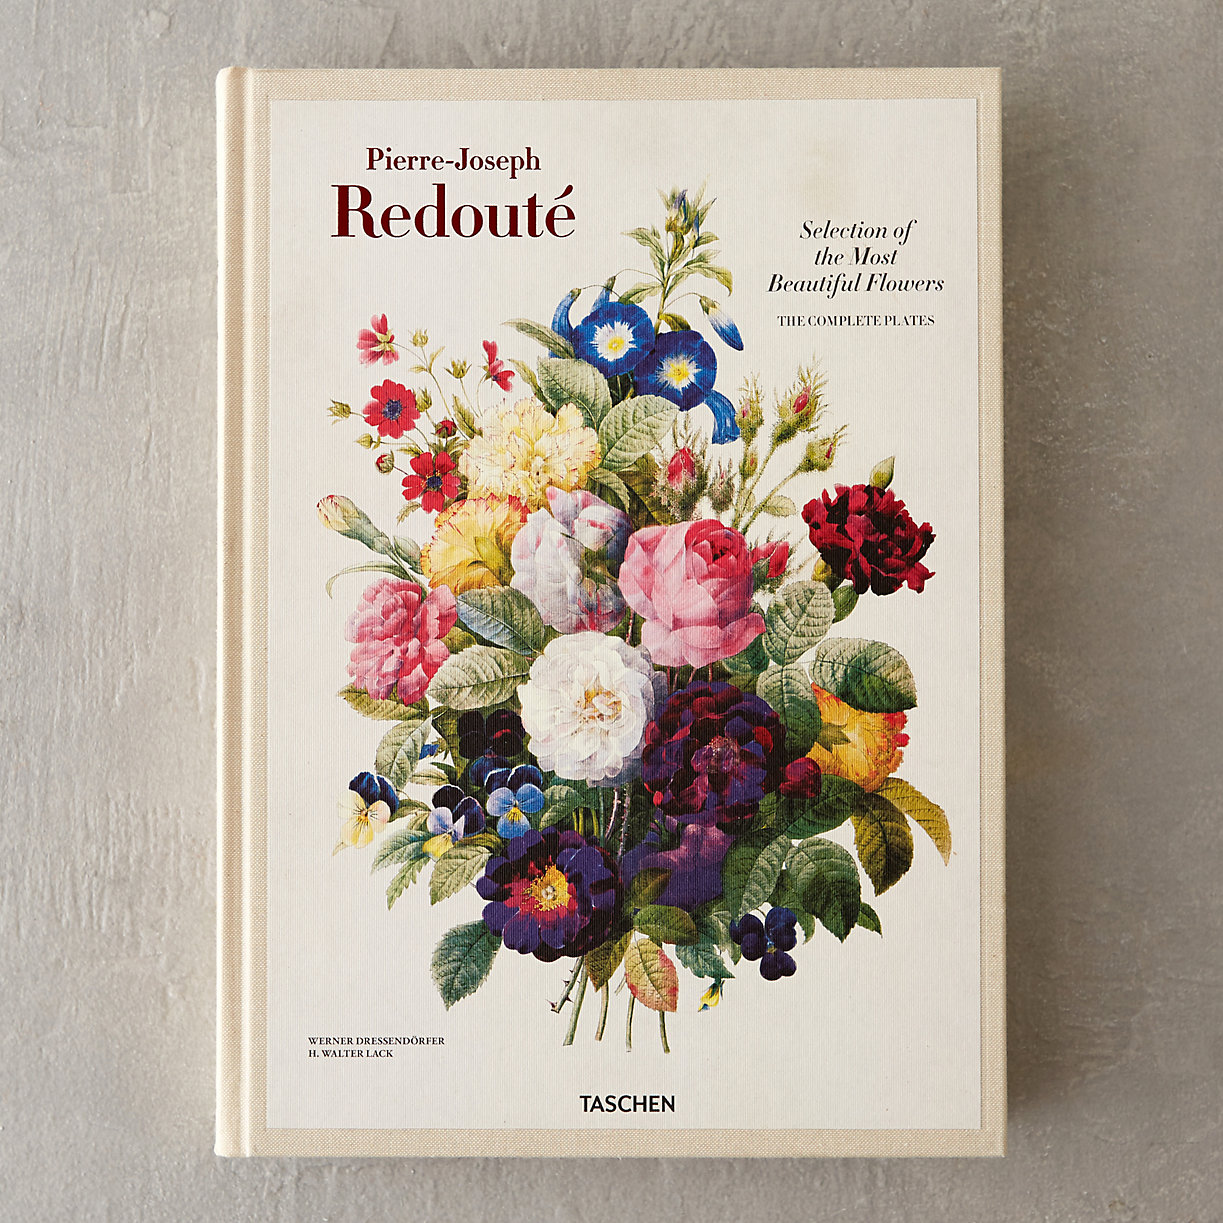 Pierre-Joseph RedoutÃ©: Selection of the Most Beautiful Flowers